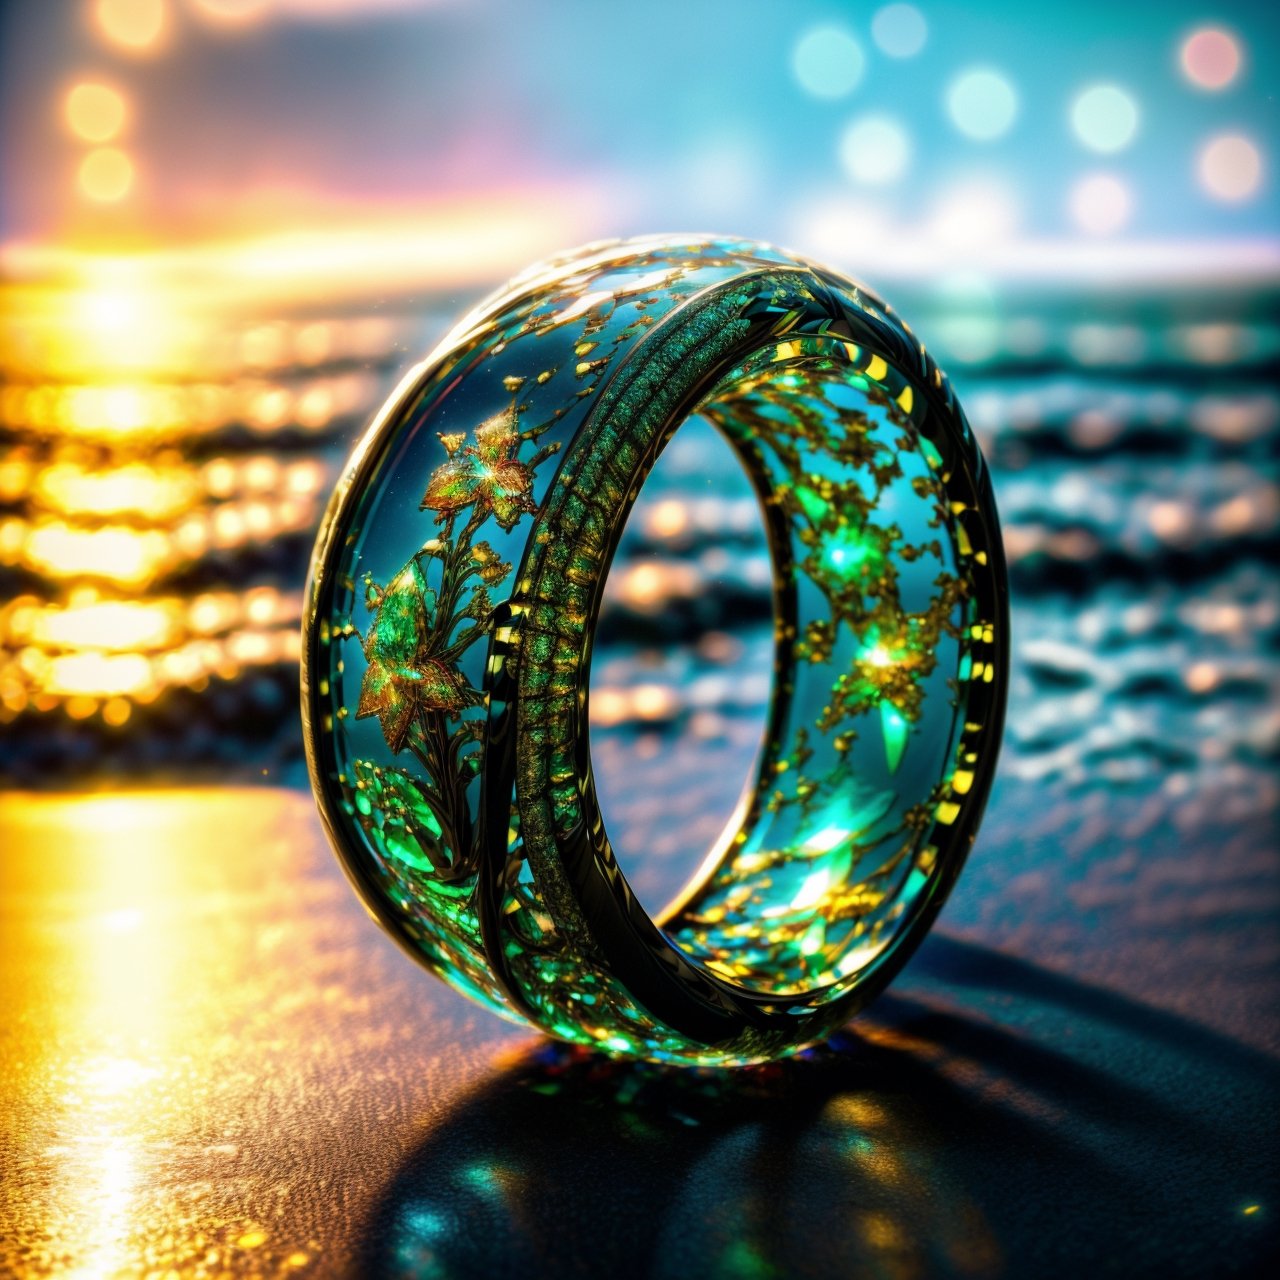 (Glass ring:1.3), masterpiece, best quality, (RAW photo, high detailed skin:1.1), glowing, blue silver purple lightning, outside at night during a thunderstorm, near the ocean, at the beach, waves splashing, (masterpiece, best quality:1.5), cinematic, ((best quality, 4k, 8k, highres, masterpiece:1.2), ultra-detailed, vivid colors, warm color tones, stunning lighting effects, clear focus, sharp details, professional photography, subtle shadows, masterpiece, best quality, cinematic, volumetric lighting, very detailed, high resolution, 32k, sharp, sharp image, 4k, 8k, 35 mm, best quality, 12k, high definition, cinematic, behance contest winner, stylized digital art, smooth, ultra high definition, 8k, ultra sharp focus, intricate artwork masterpiece, epic, 4k details, ultra details, dynamic lighting, cinematic, 8k ultra fine detail, masterpiece,ring,lightning_sparkle_background,Circle,ff14bg,RING,1 girl,FFIXBG